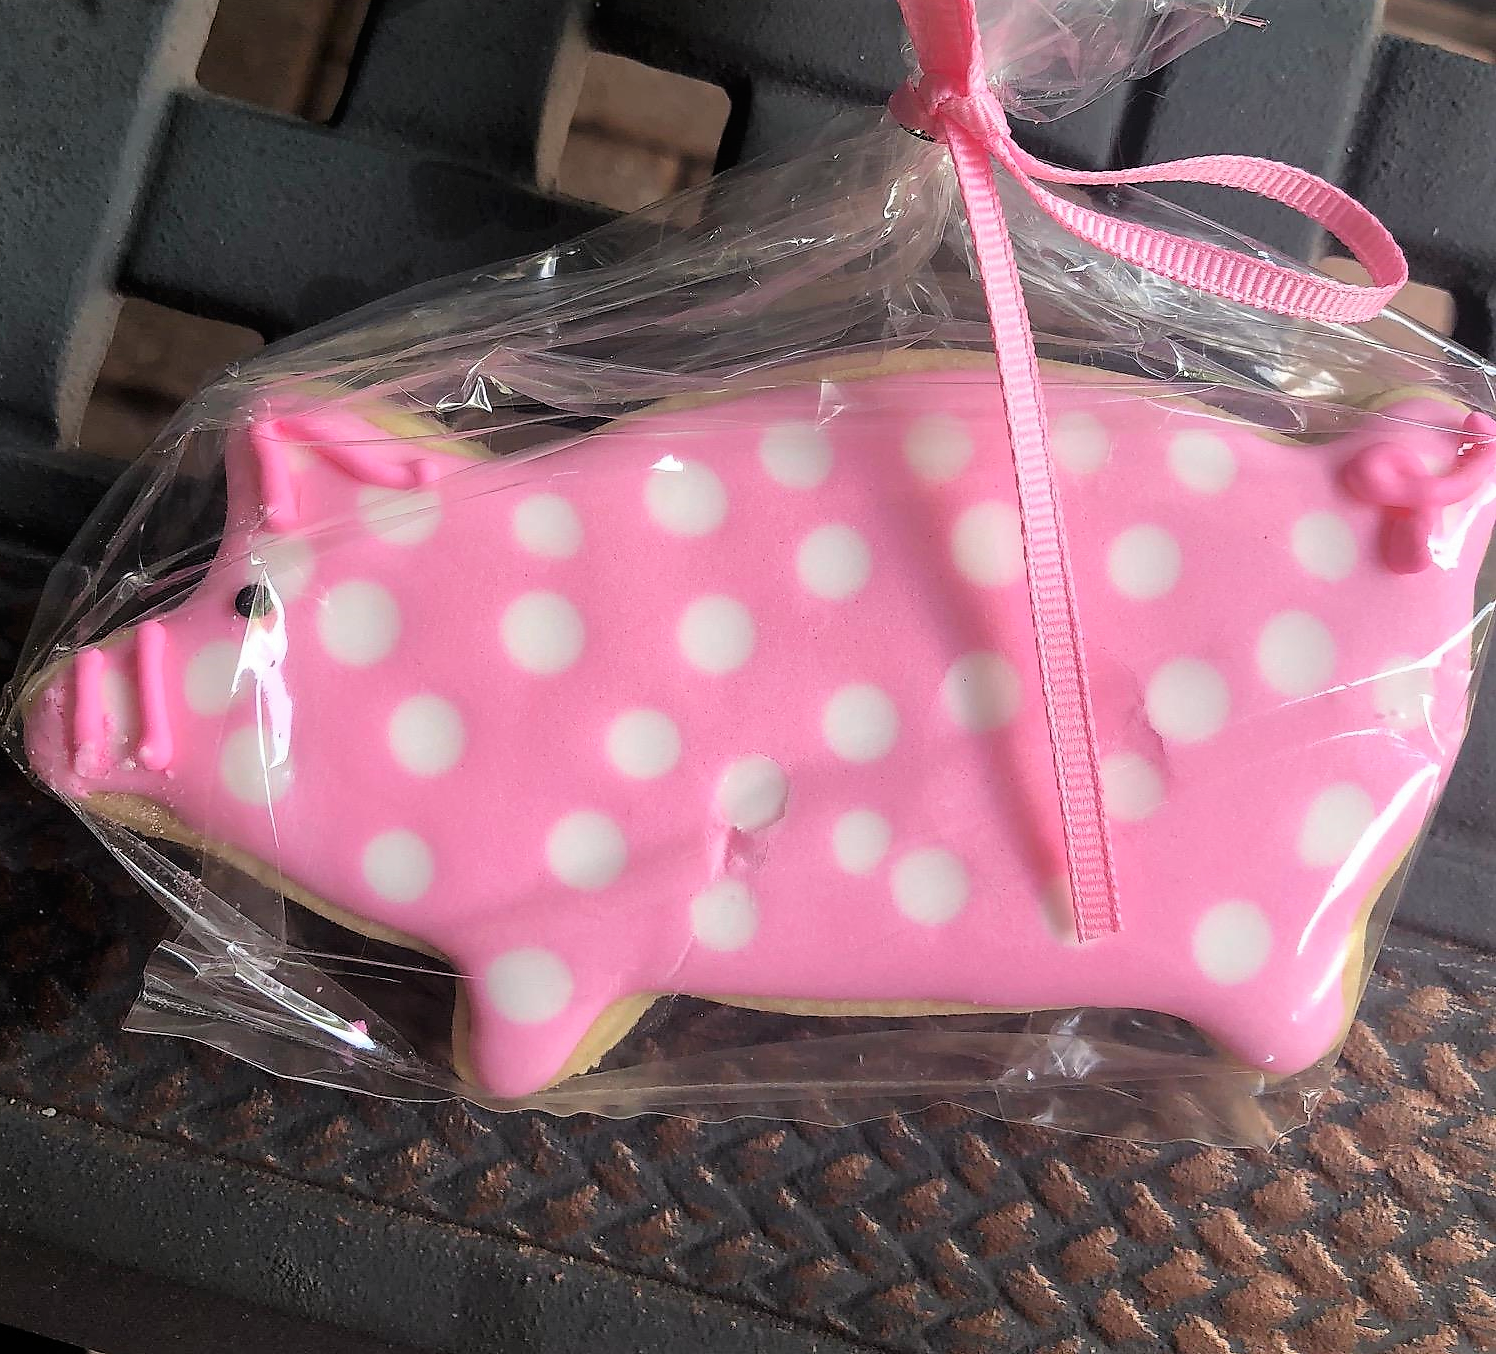 pig cookies made by SURVICE employee